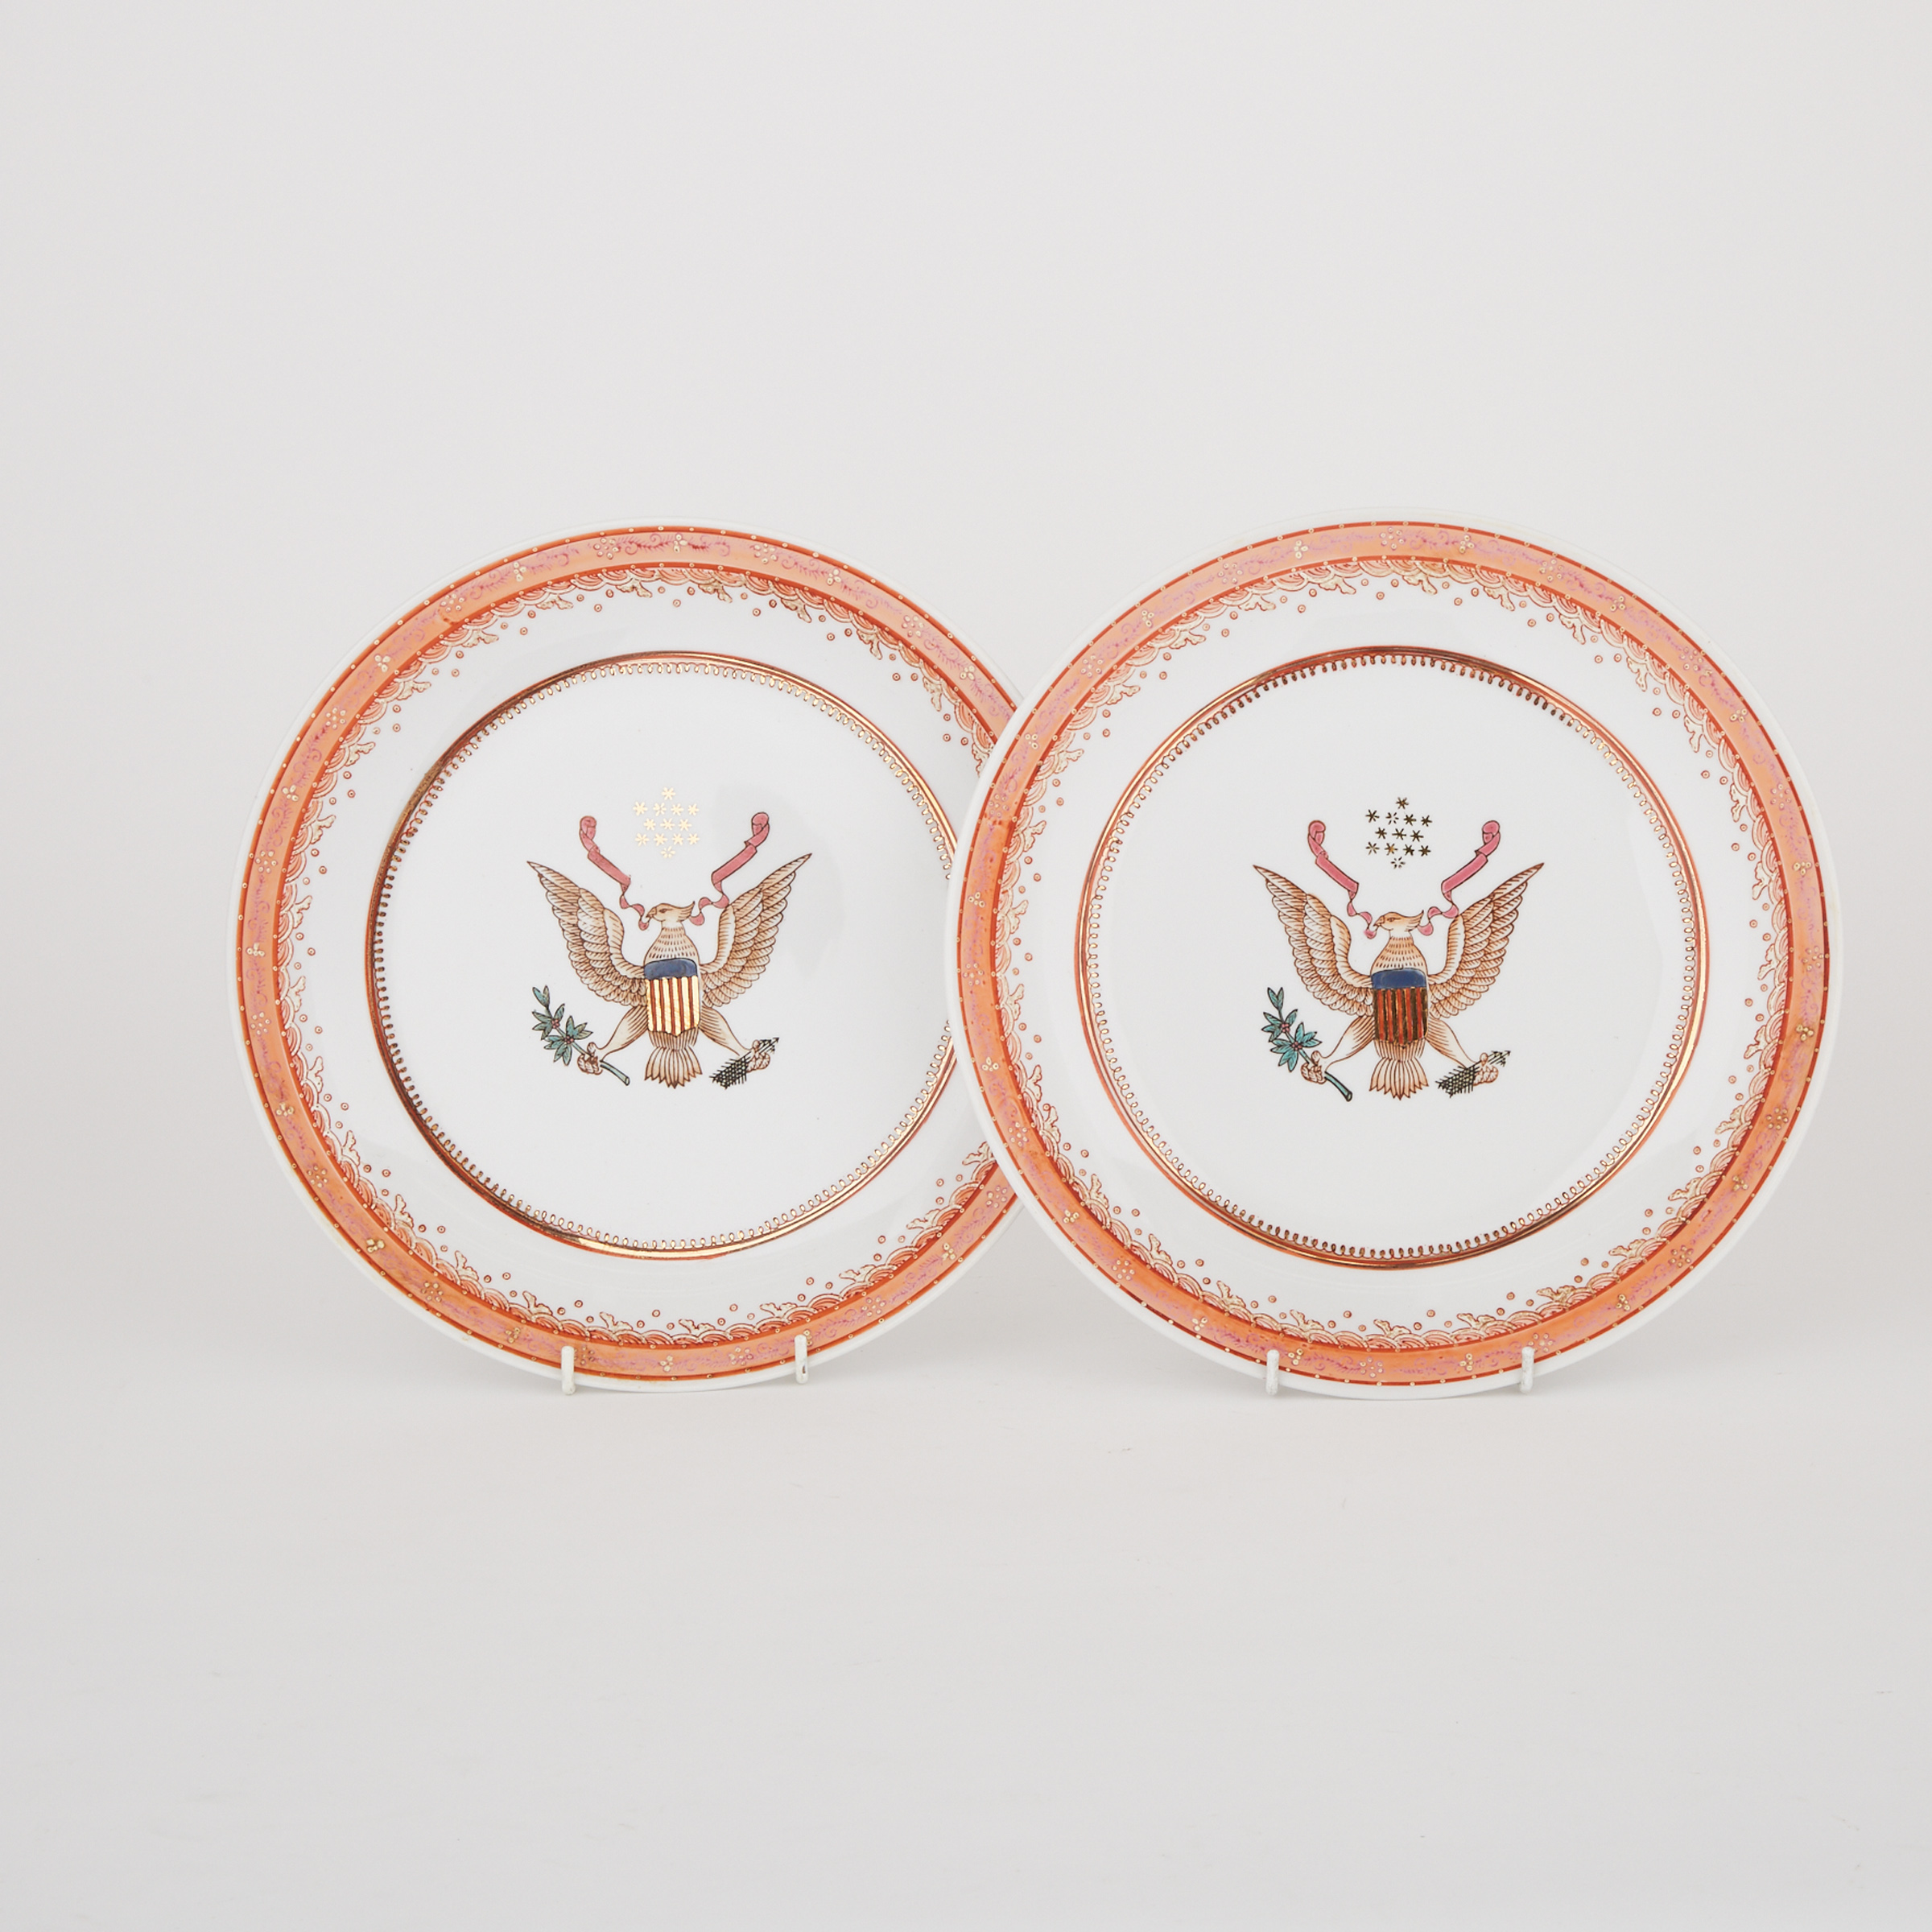 Pair of Chinese Export Style Porcelain ‘American Eagle’ Chargers, possibly Samson, 20th century